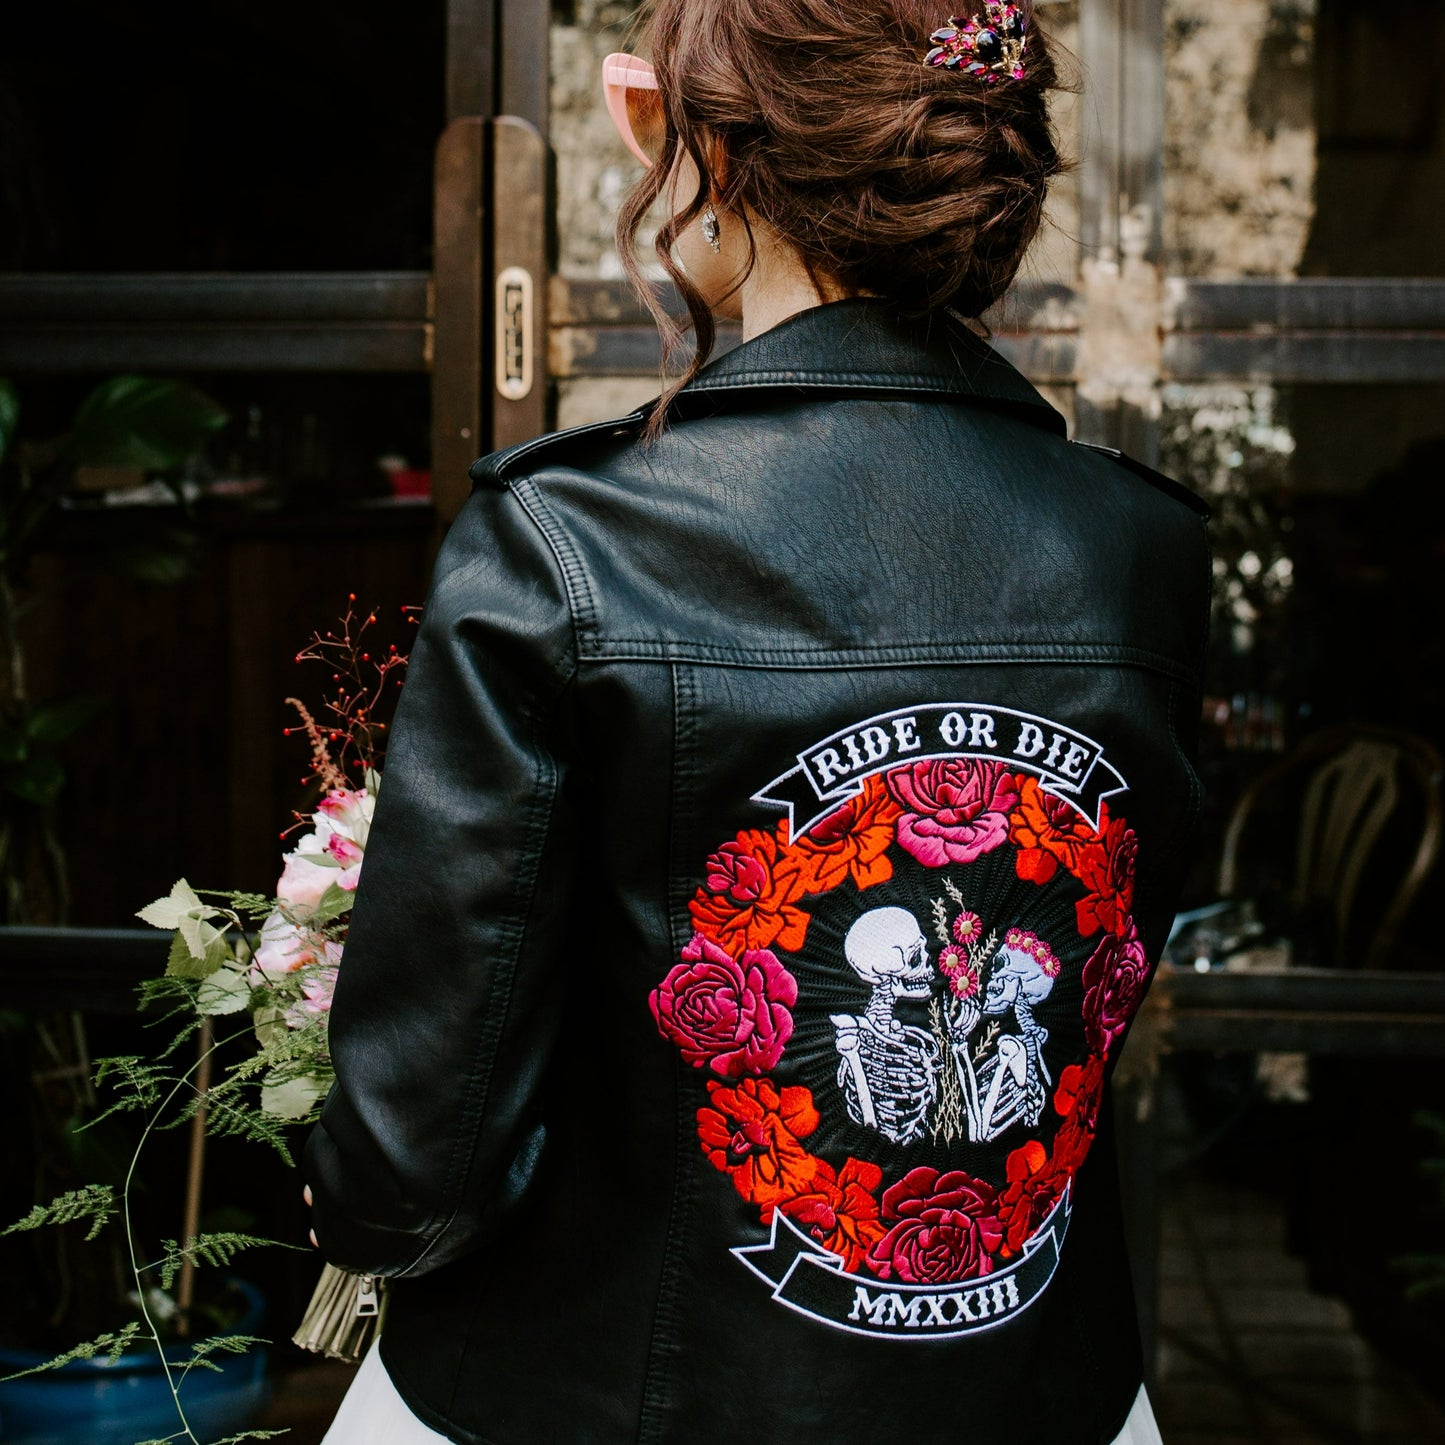 Black leather bridal jacket featuring a Ride Or Die Floral Skeleton Couple – a chic and unconventional cover-up for the modern bride